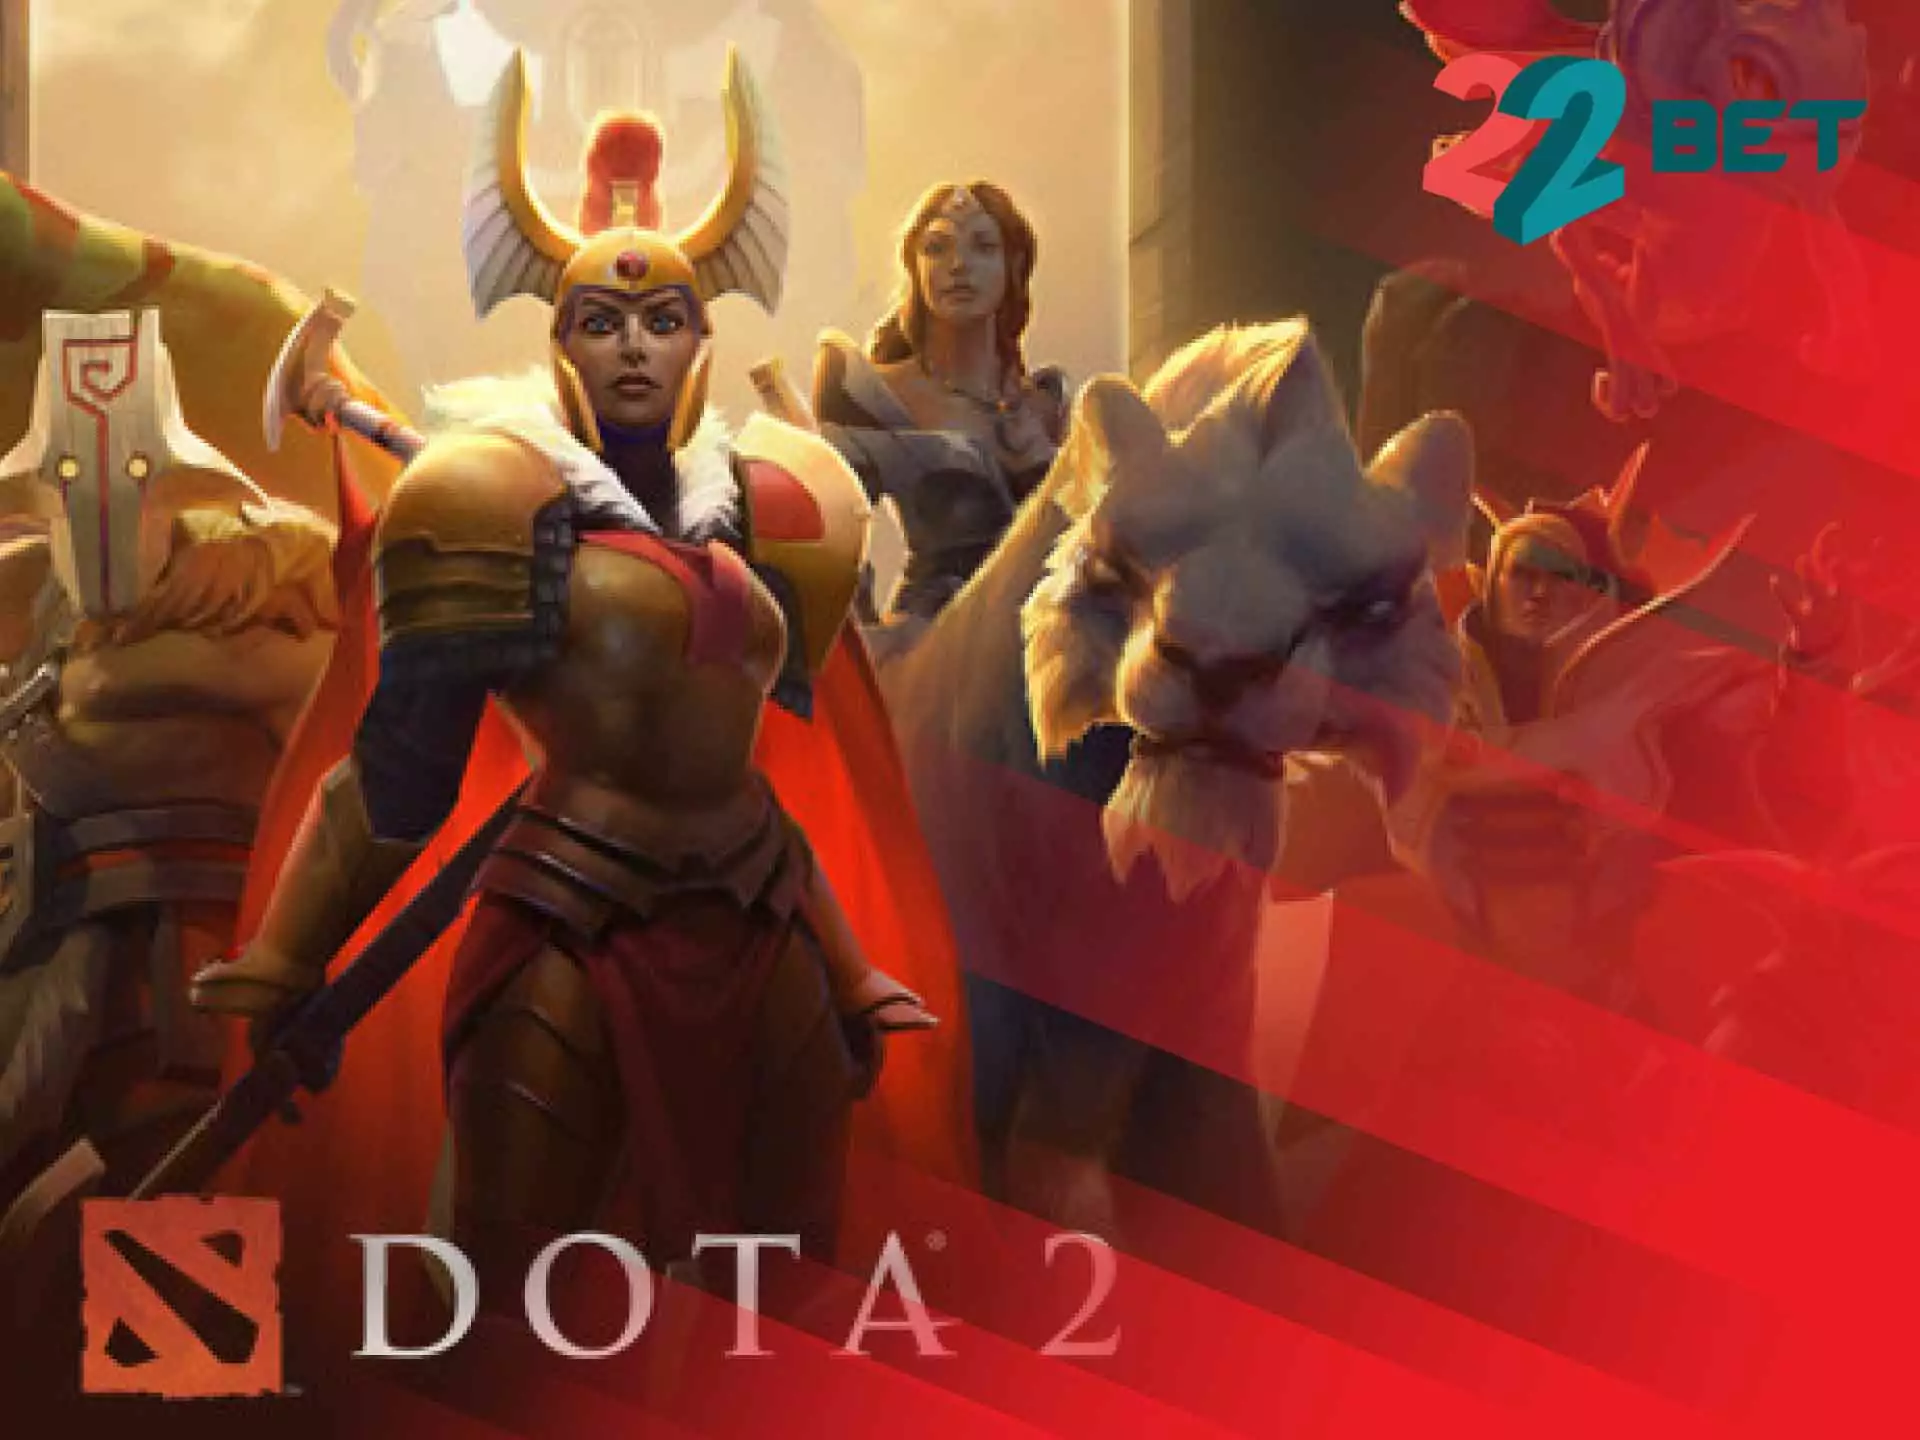 Dota 2 amateurs can place bets on this game in the 22bet sportsbook.